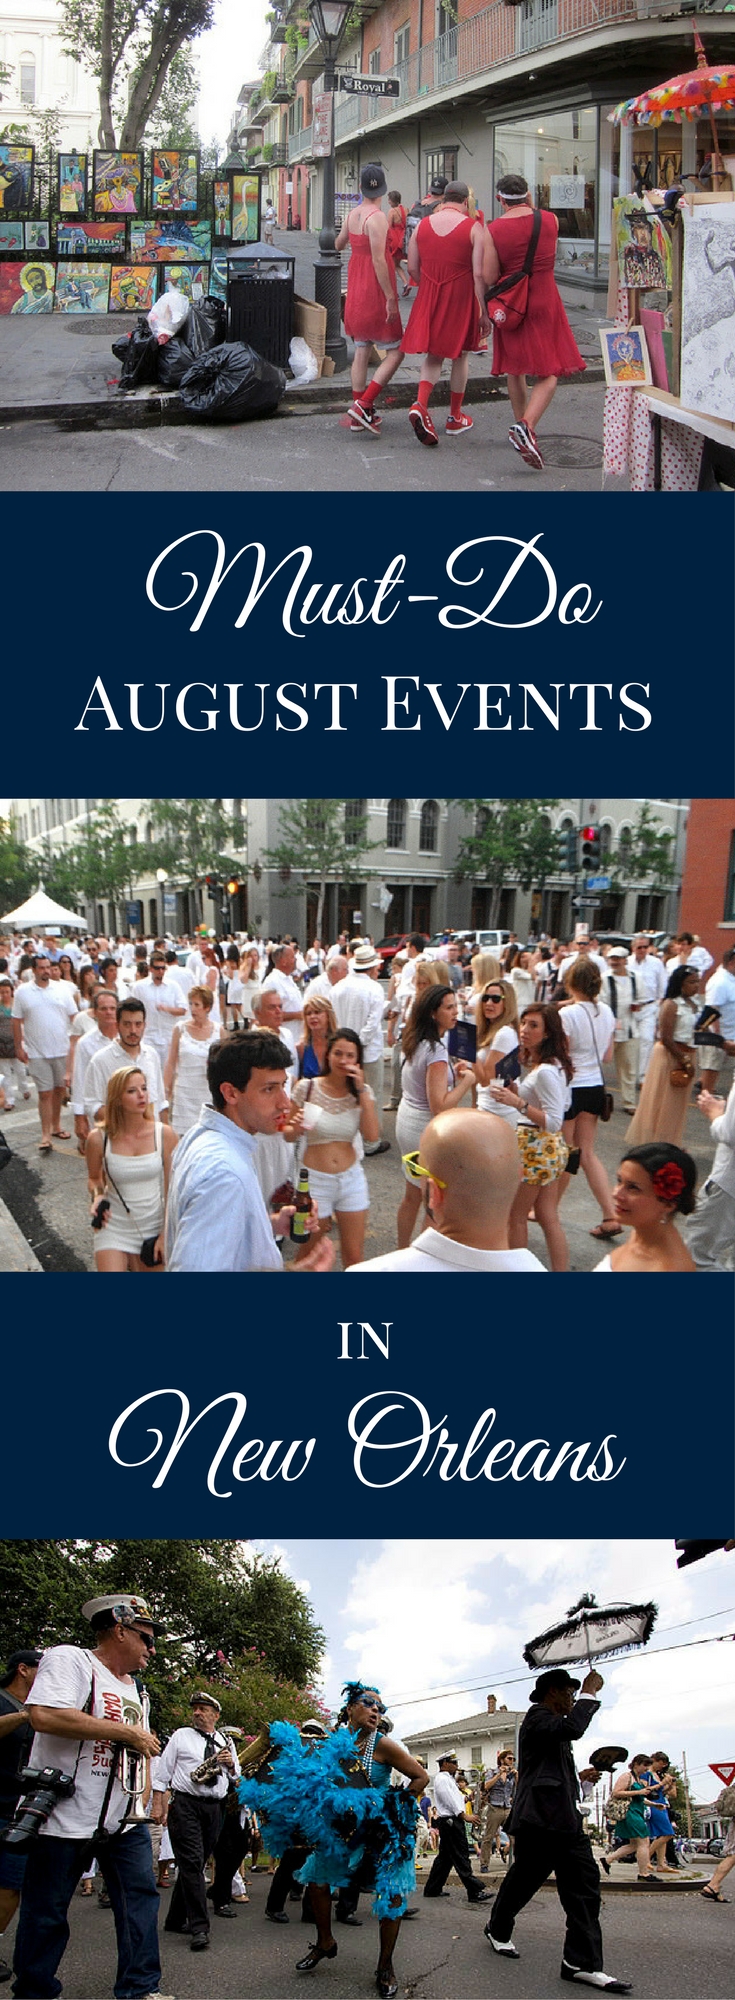 August in New Orleans brings plenty of summer fun. From White Linen Night to Red Dress Run, add these festive events to your New Orleans vacation plans.